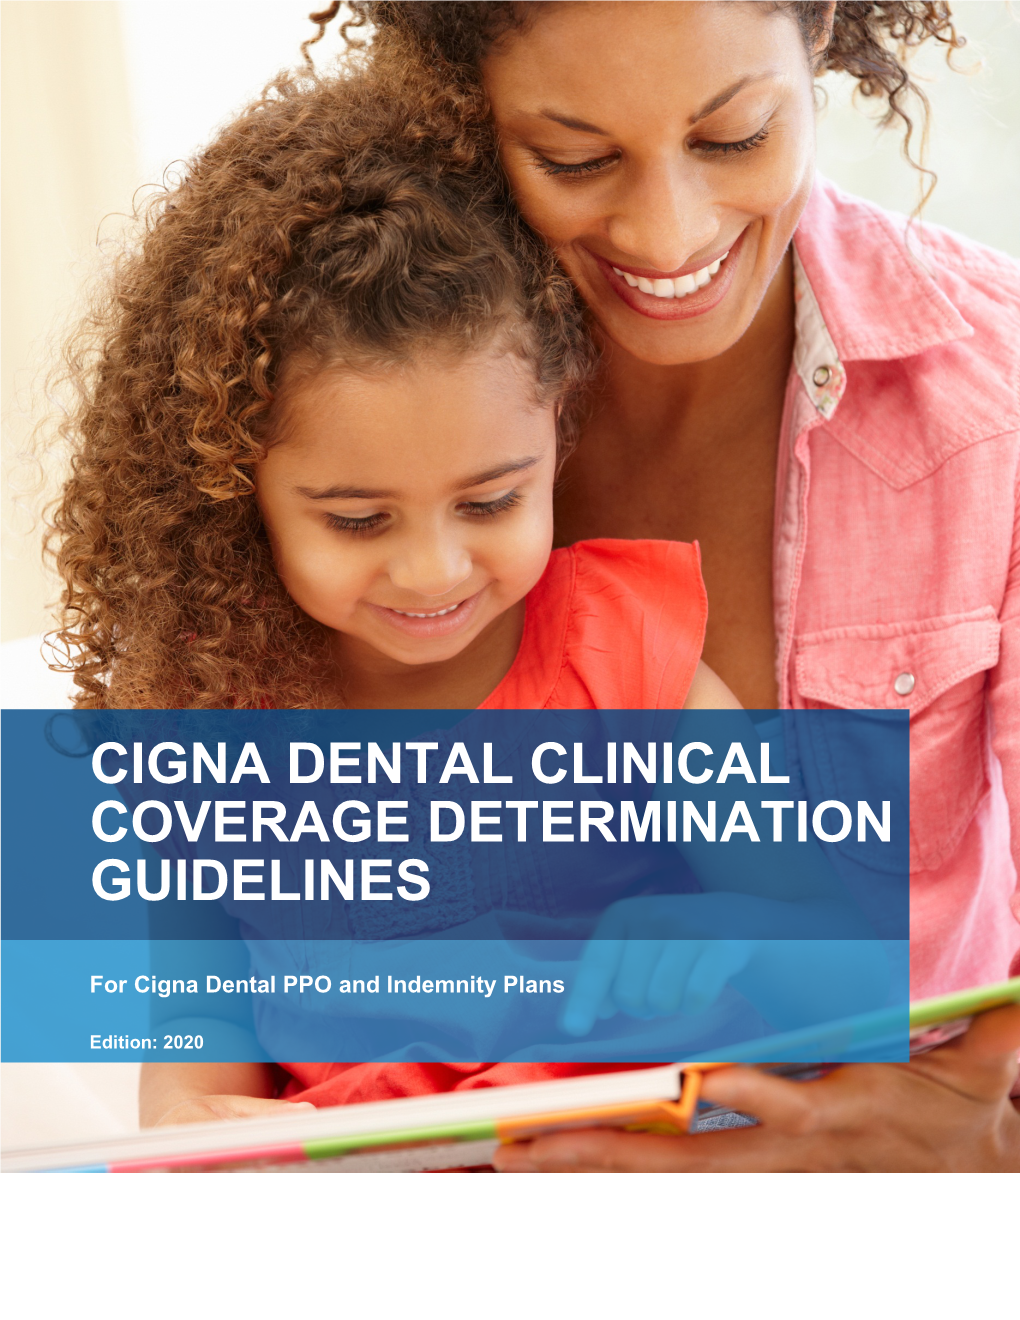 Cigna Dental Clinical Coverage Determination Guidelines Is Provided for Informational Purposes